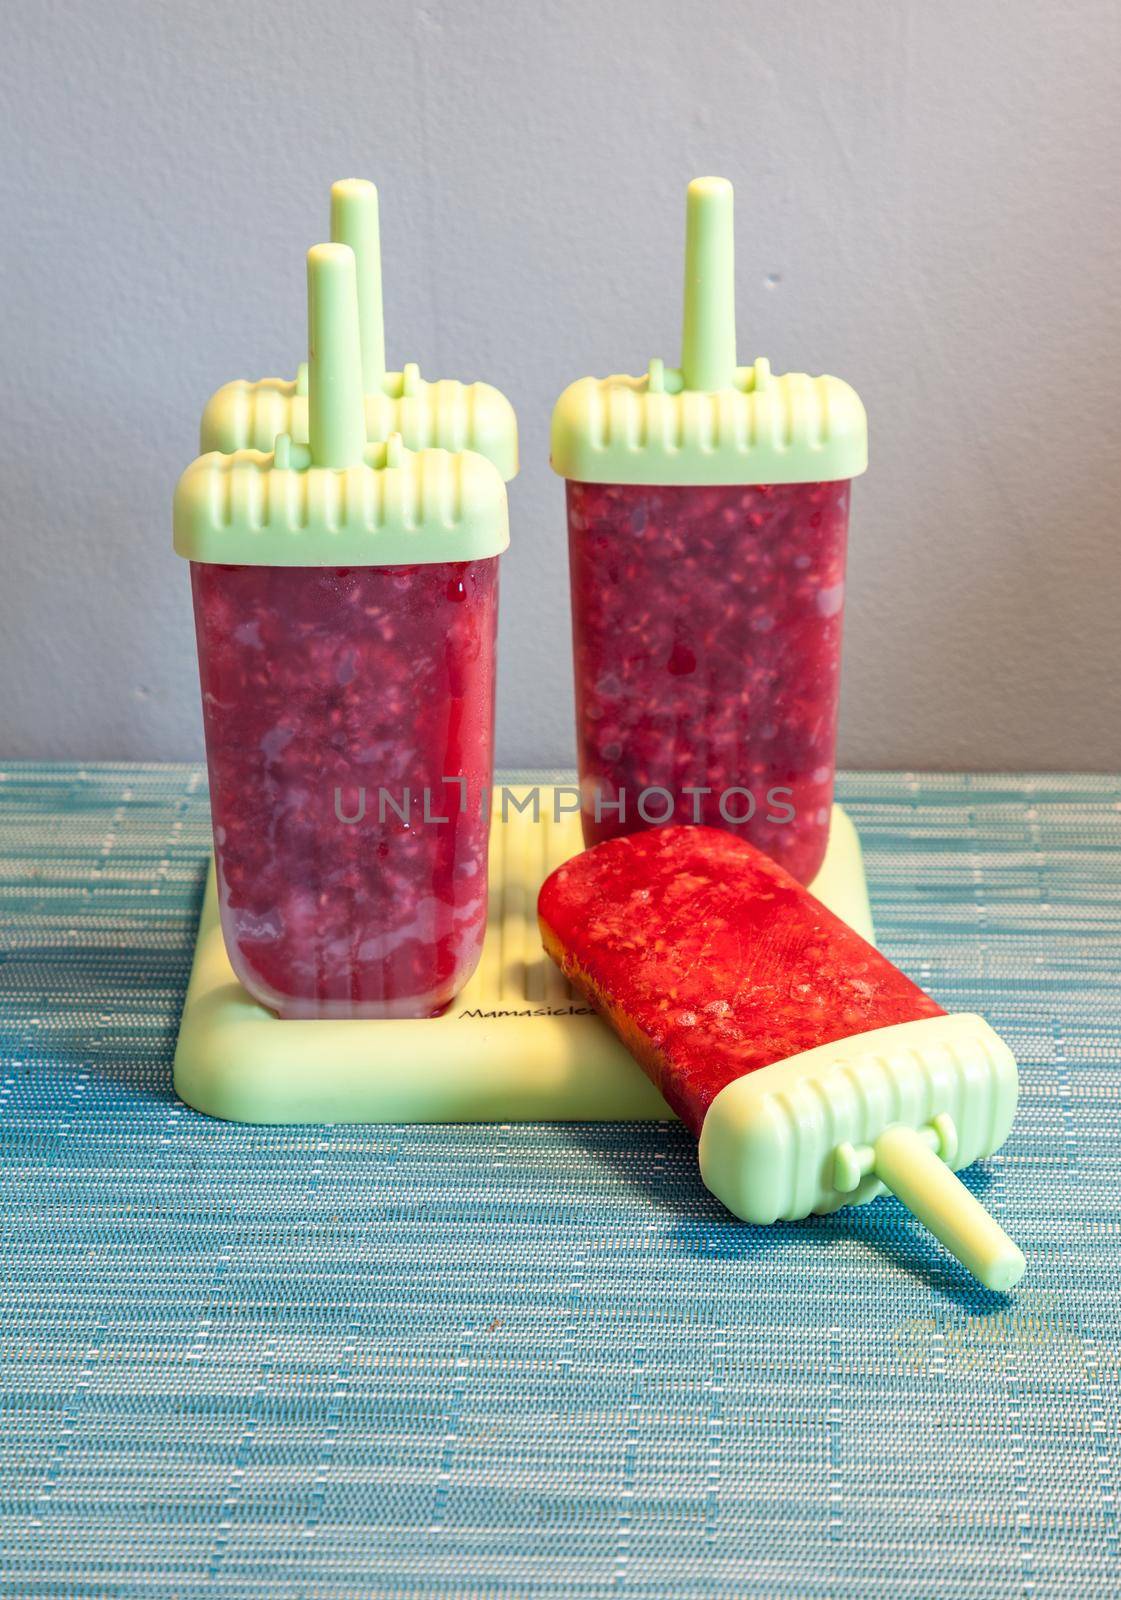 Homemade raspberry popsicles in a green mold by steffstarr